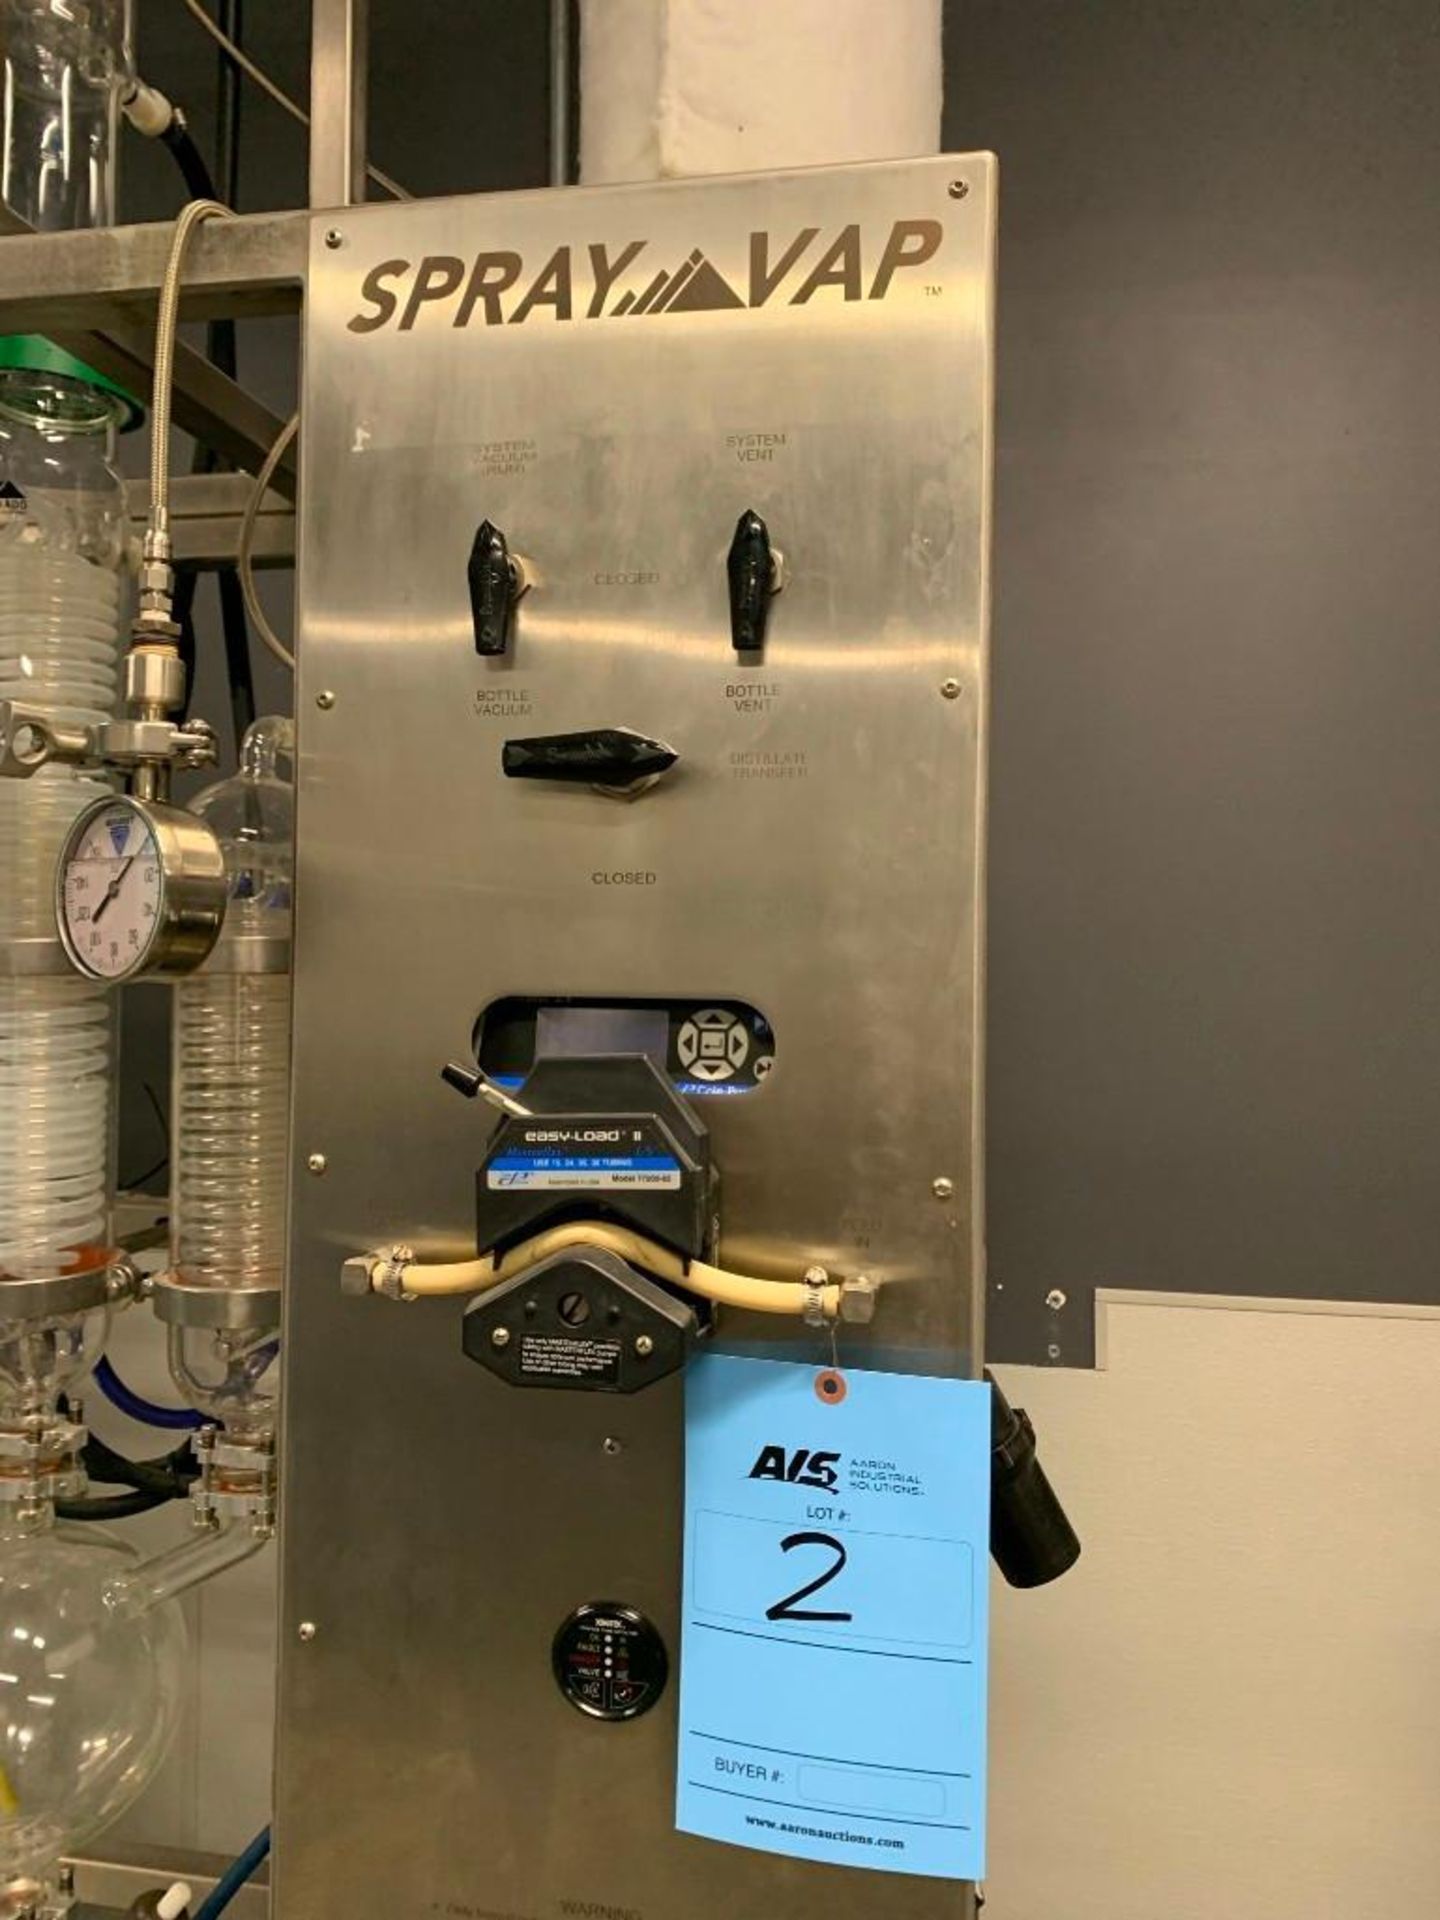 COLORADO EXTRACTION SYSTEMS Twinpac Extraction System Model SPRAYVAP CUSTOM, S/N 801347 (2019), 15 T - Image 3 of 14